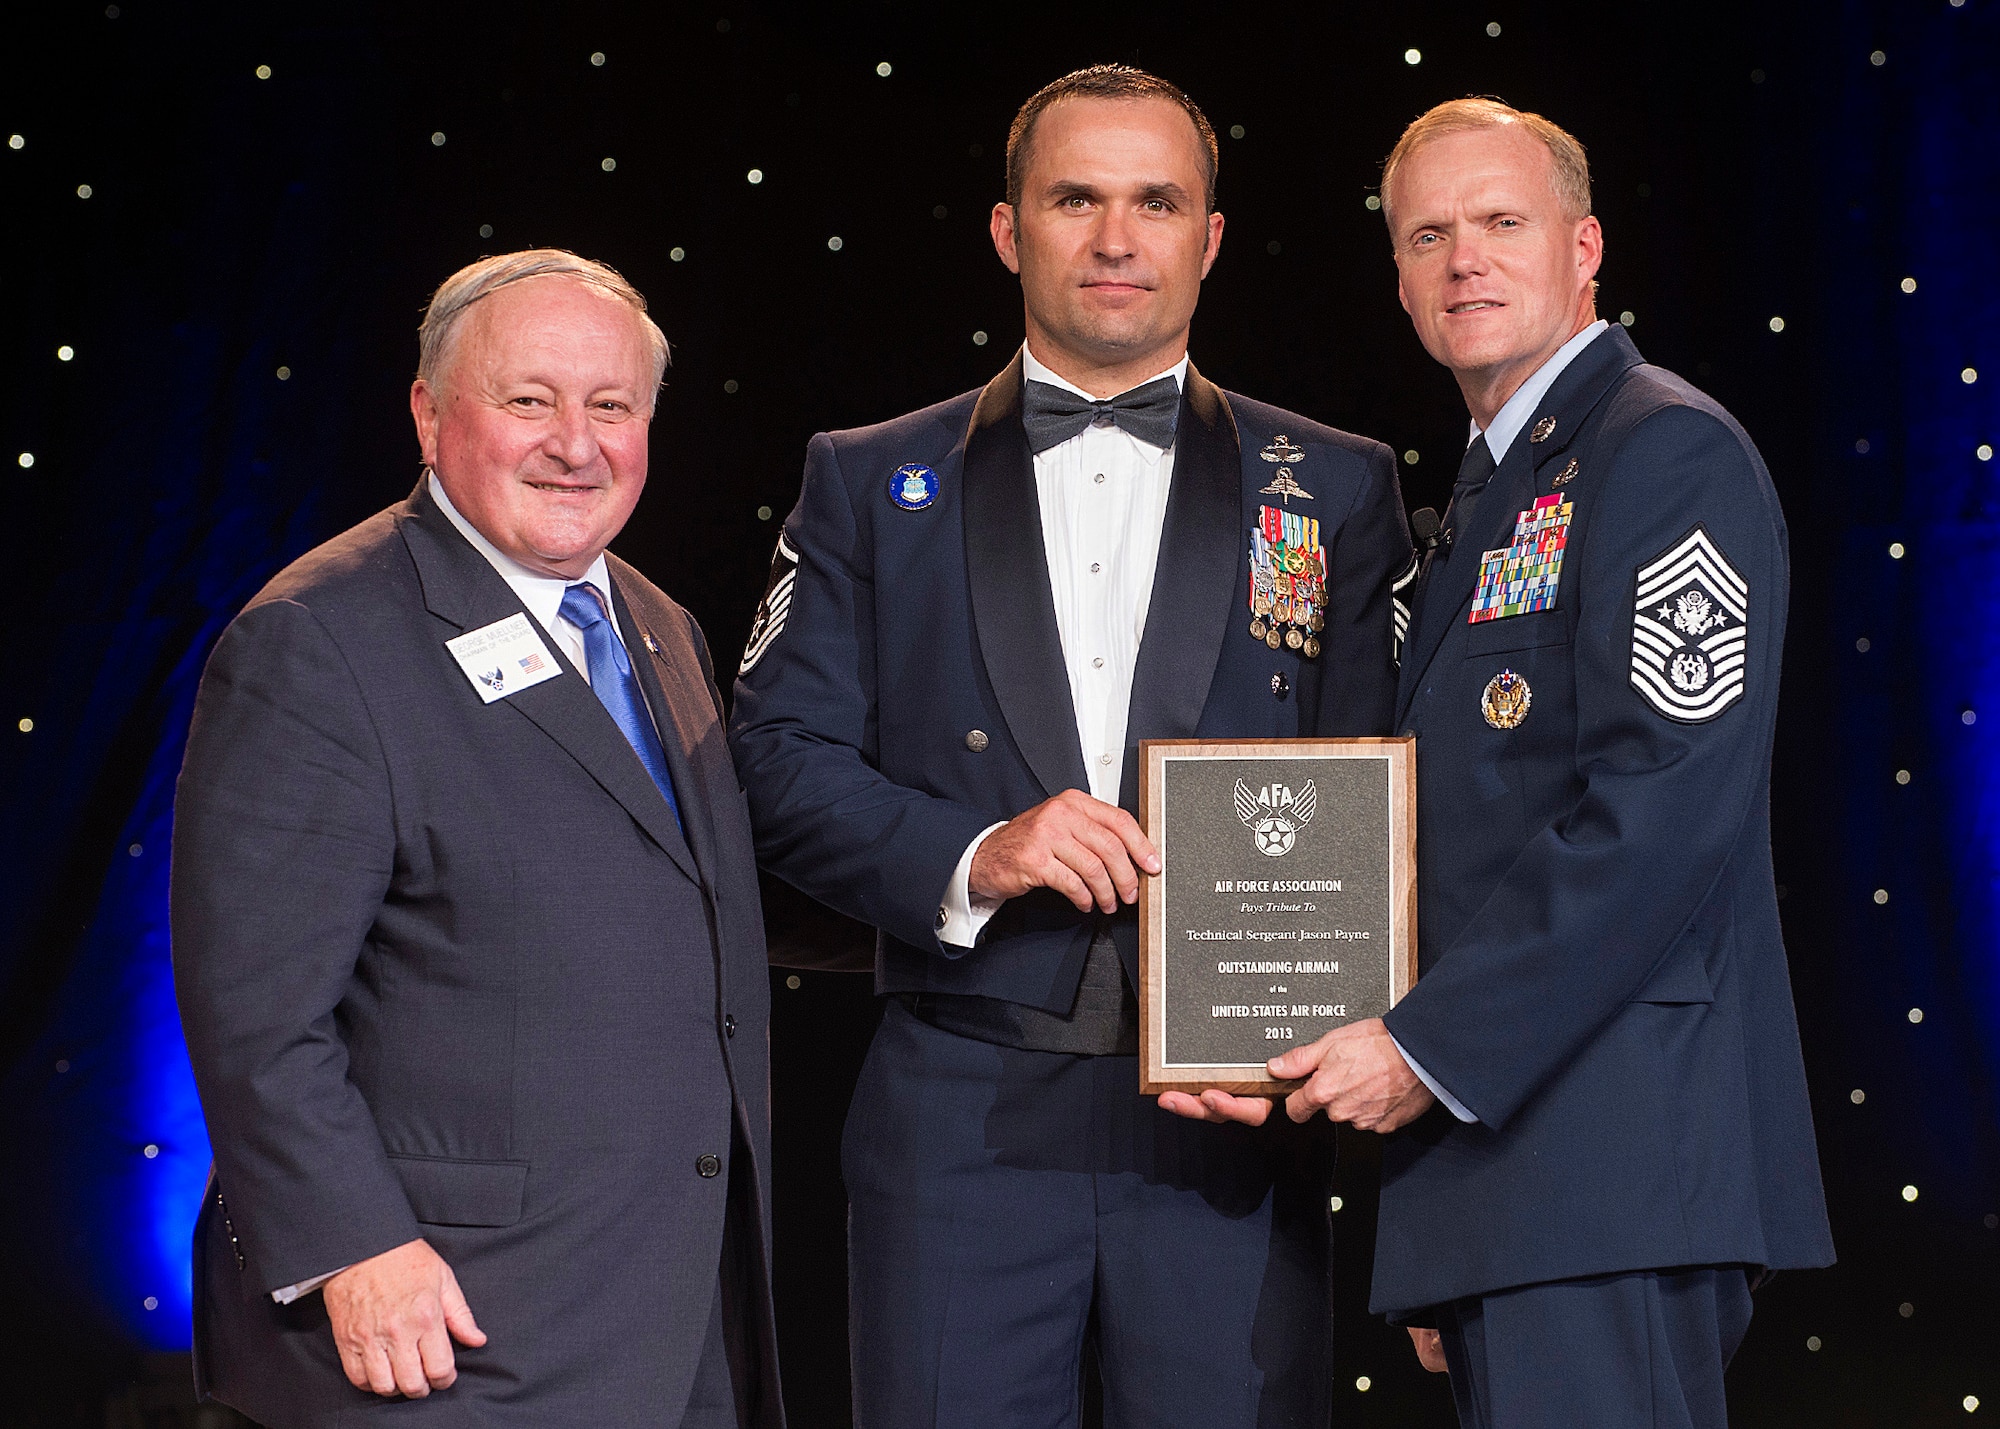 Tech. Sgt. Jason Payne was recognized as one of the 12 Outstanding Airmen of the Year at a reception and awards dinner hosted by the Air Force Association during the AFA's annual Air & Space Conference and Technology Exposition Sept. 16, 2013, in Washington, D.C. The OAY award recognizes the top 12 outstanding enlisted Airmen for superior leadership, job performance, community involvement and personal achievements. Payne is a combat control craftsman with the 24th Special Operations Wing, Hurlburt Field, Fla. (U.S. Air Force photo/Jim Varhegyi)